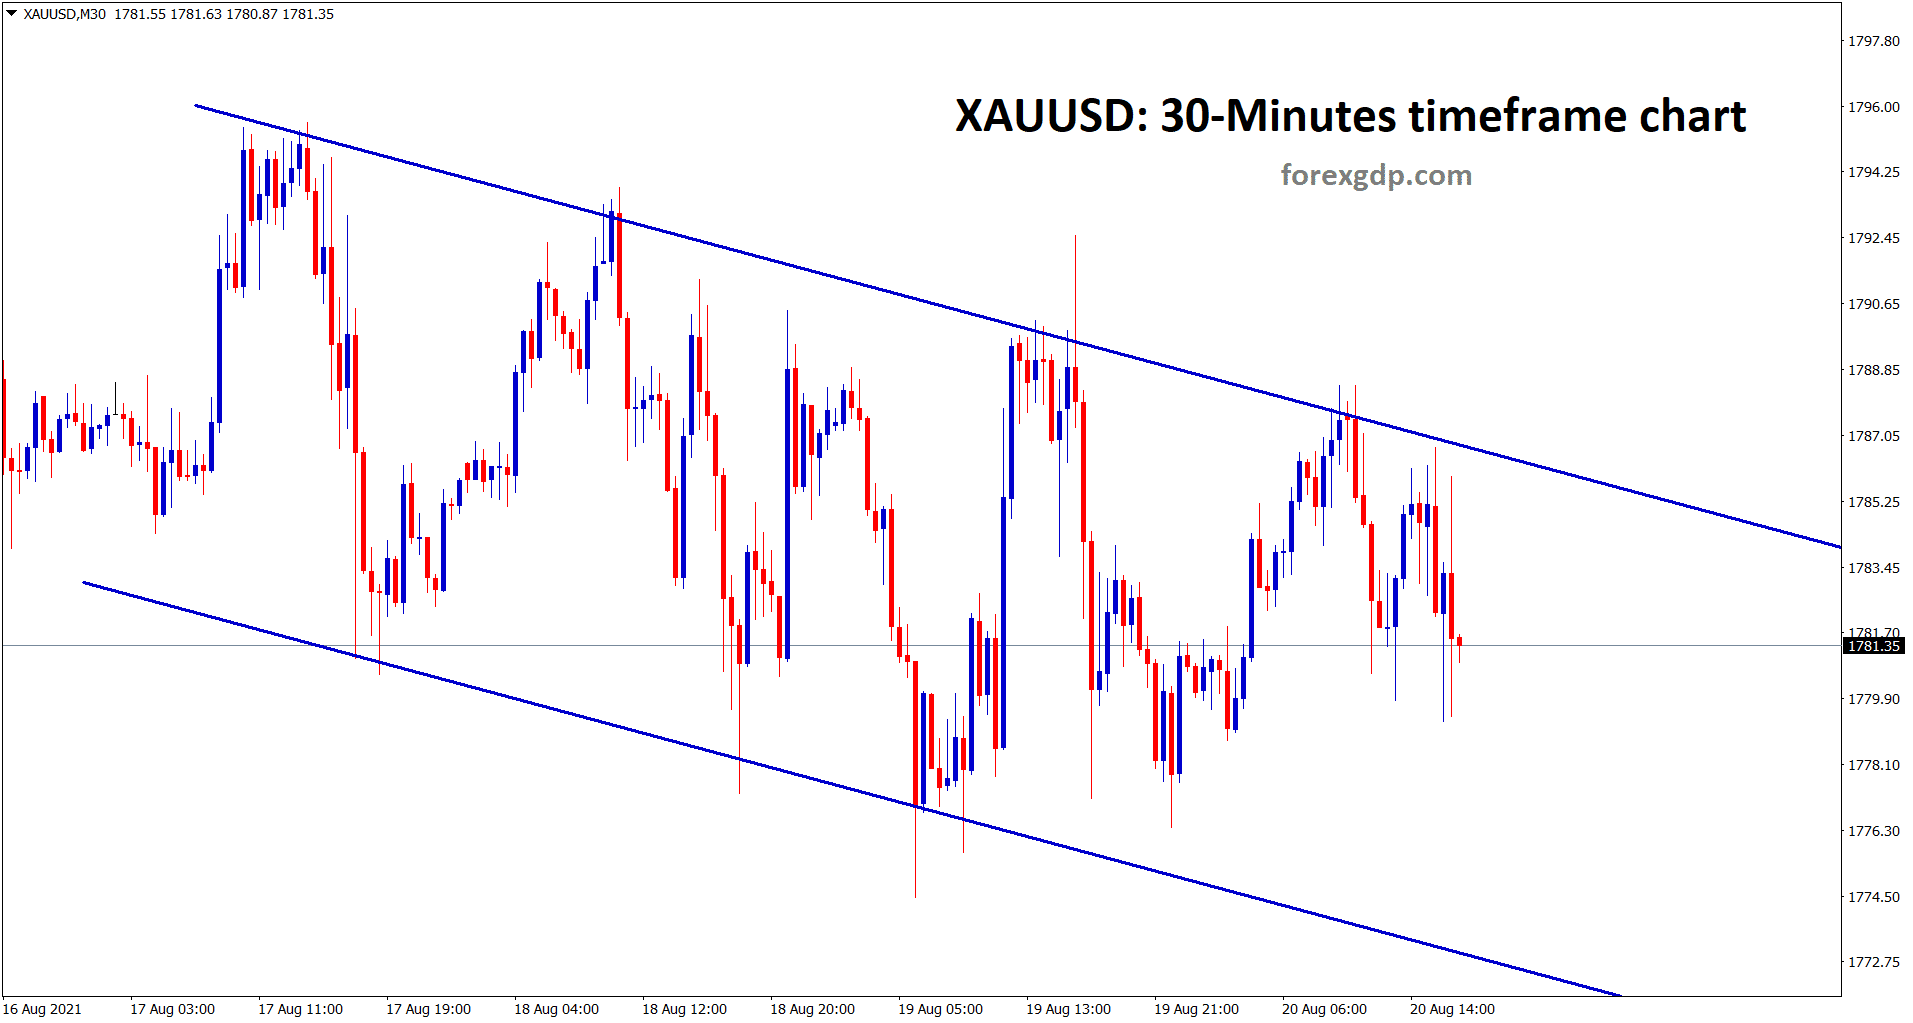 Gold is still moving in a Descending channel range for a long time